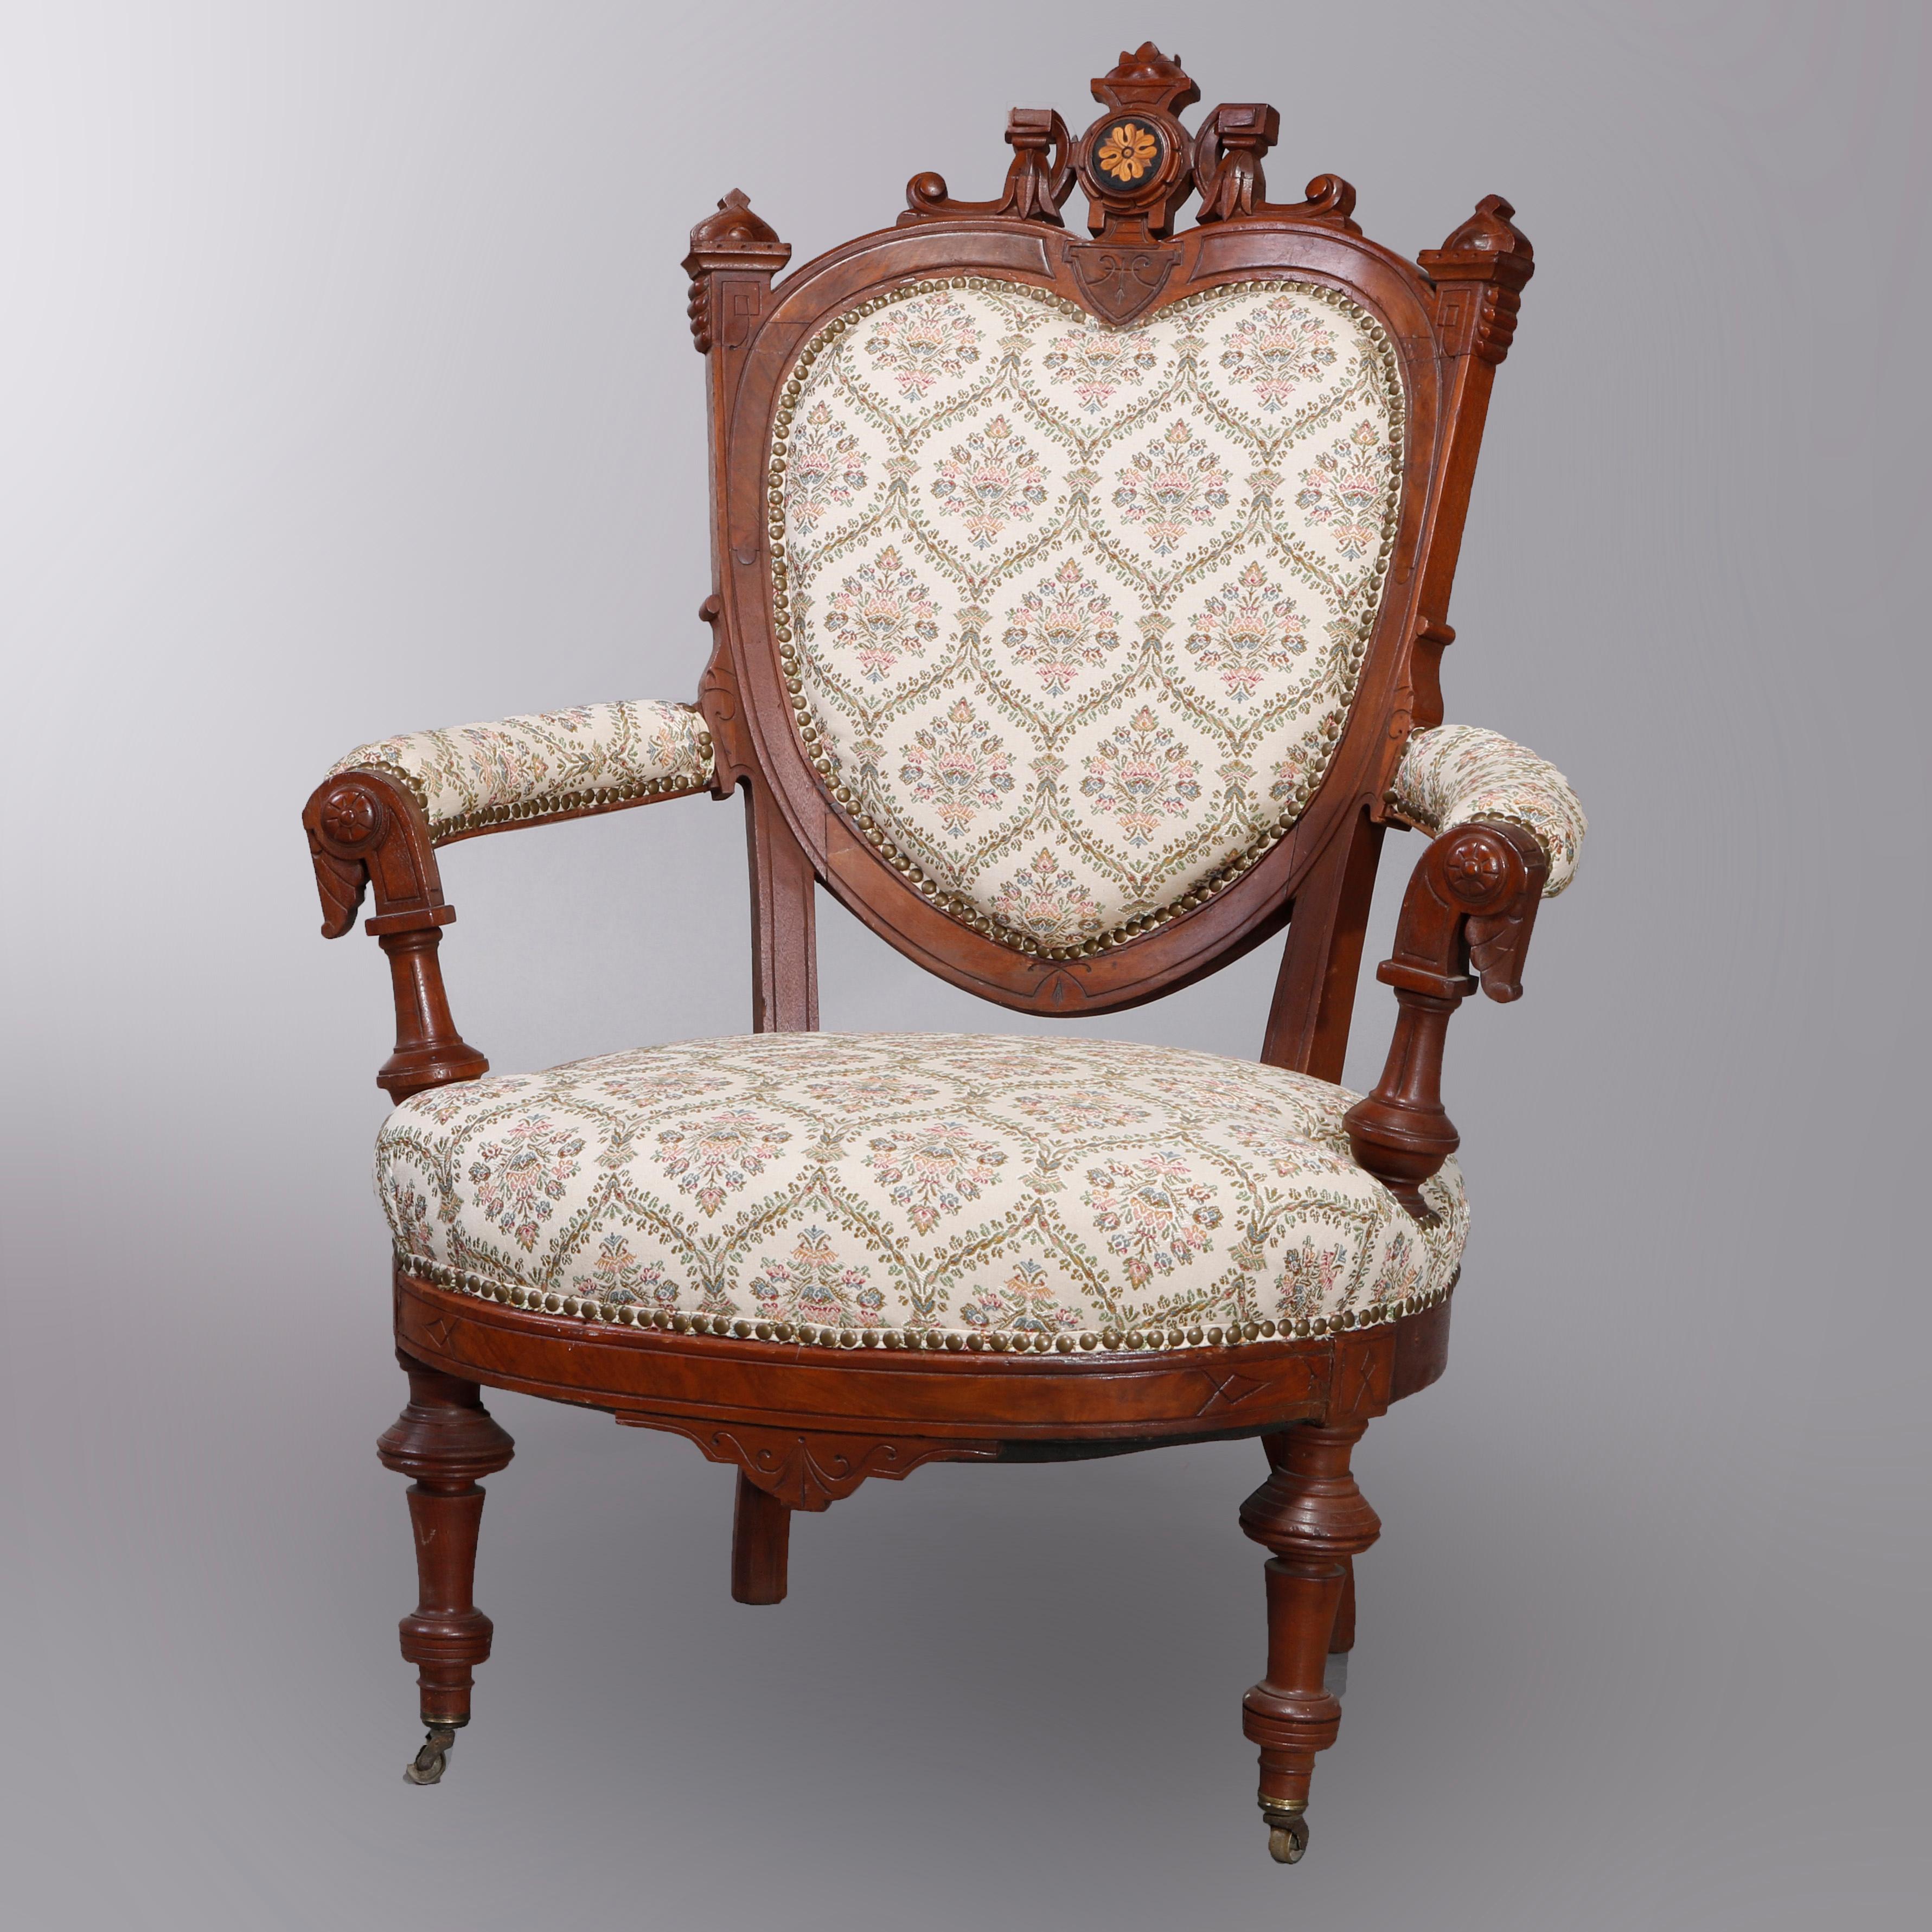 19th Century Antique Renaissance Revival Walnut & Burl Parlor Armchairs with Marquetry, c1880 For Sale